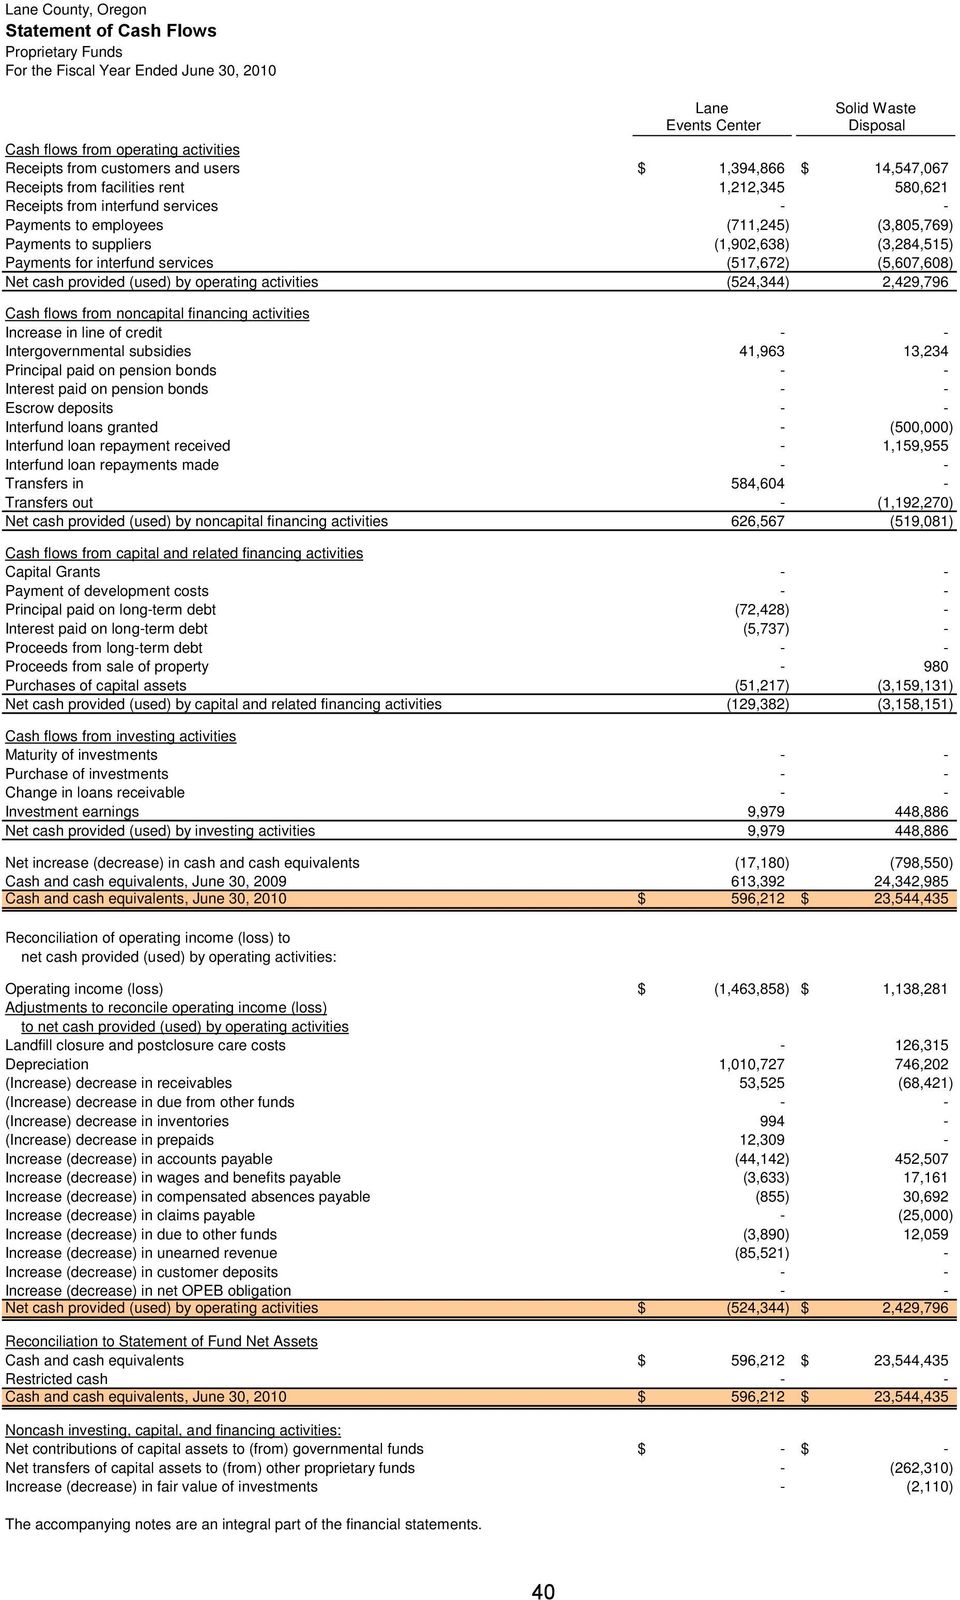 for interfund services (517,672) (5,607,608) Net cash provided (used) by operating activities (524,344) 2,429,796 Cash flows from noncapital financing activities Increase in line of credit - -